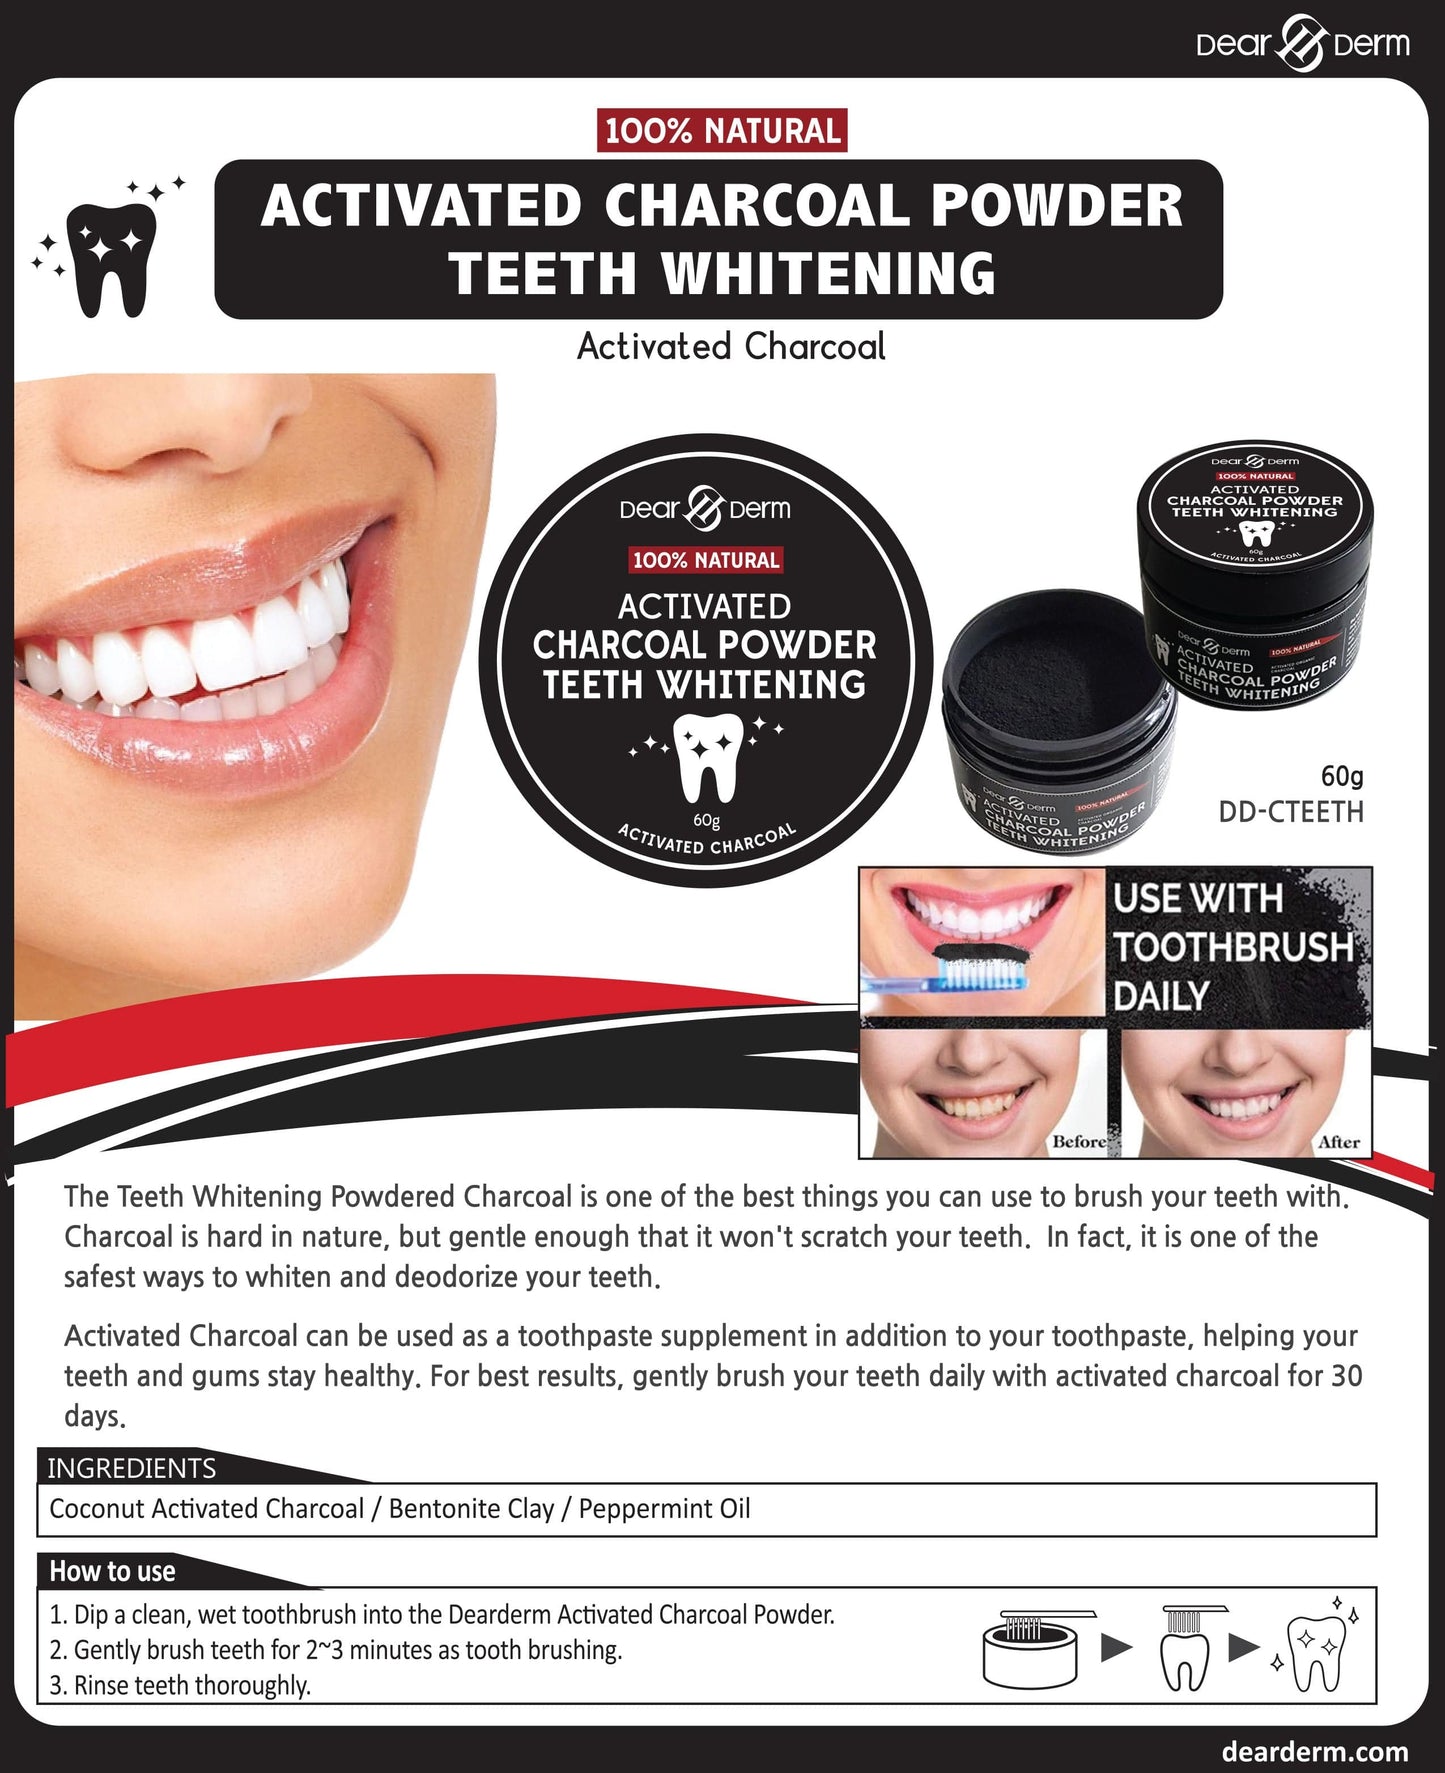 DEARDERM 100% Natural Activated Charcoal Powder Teeth Whitening